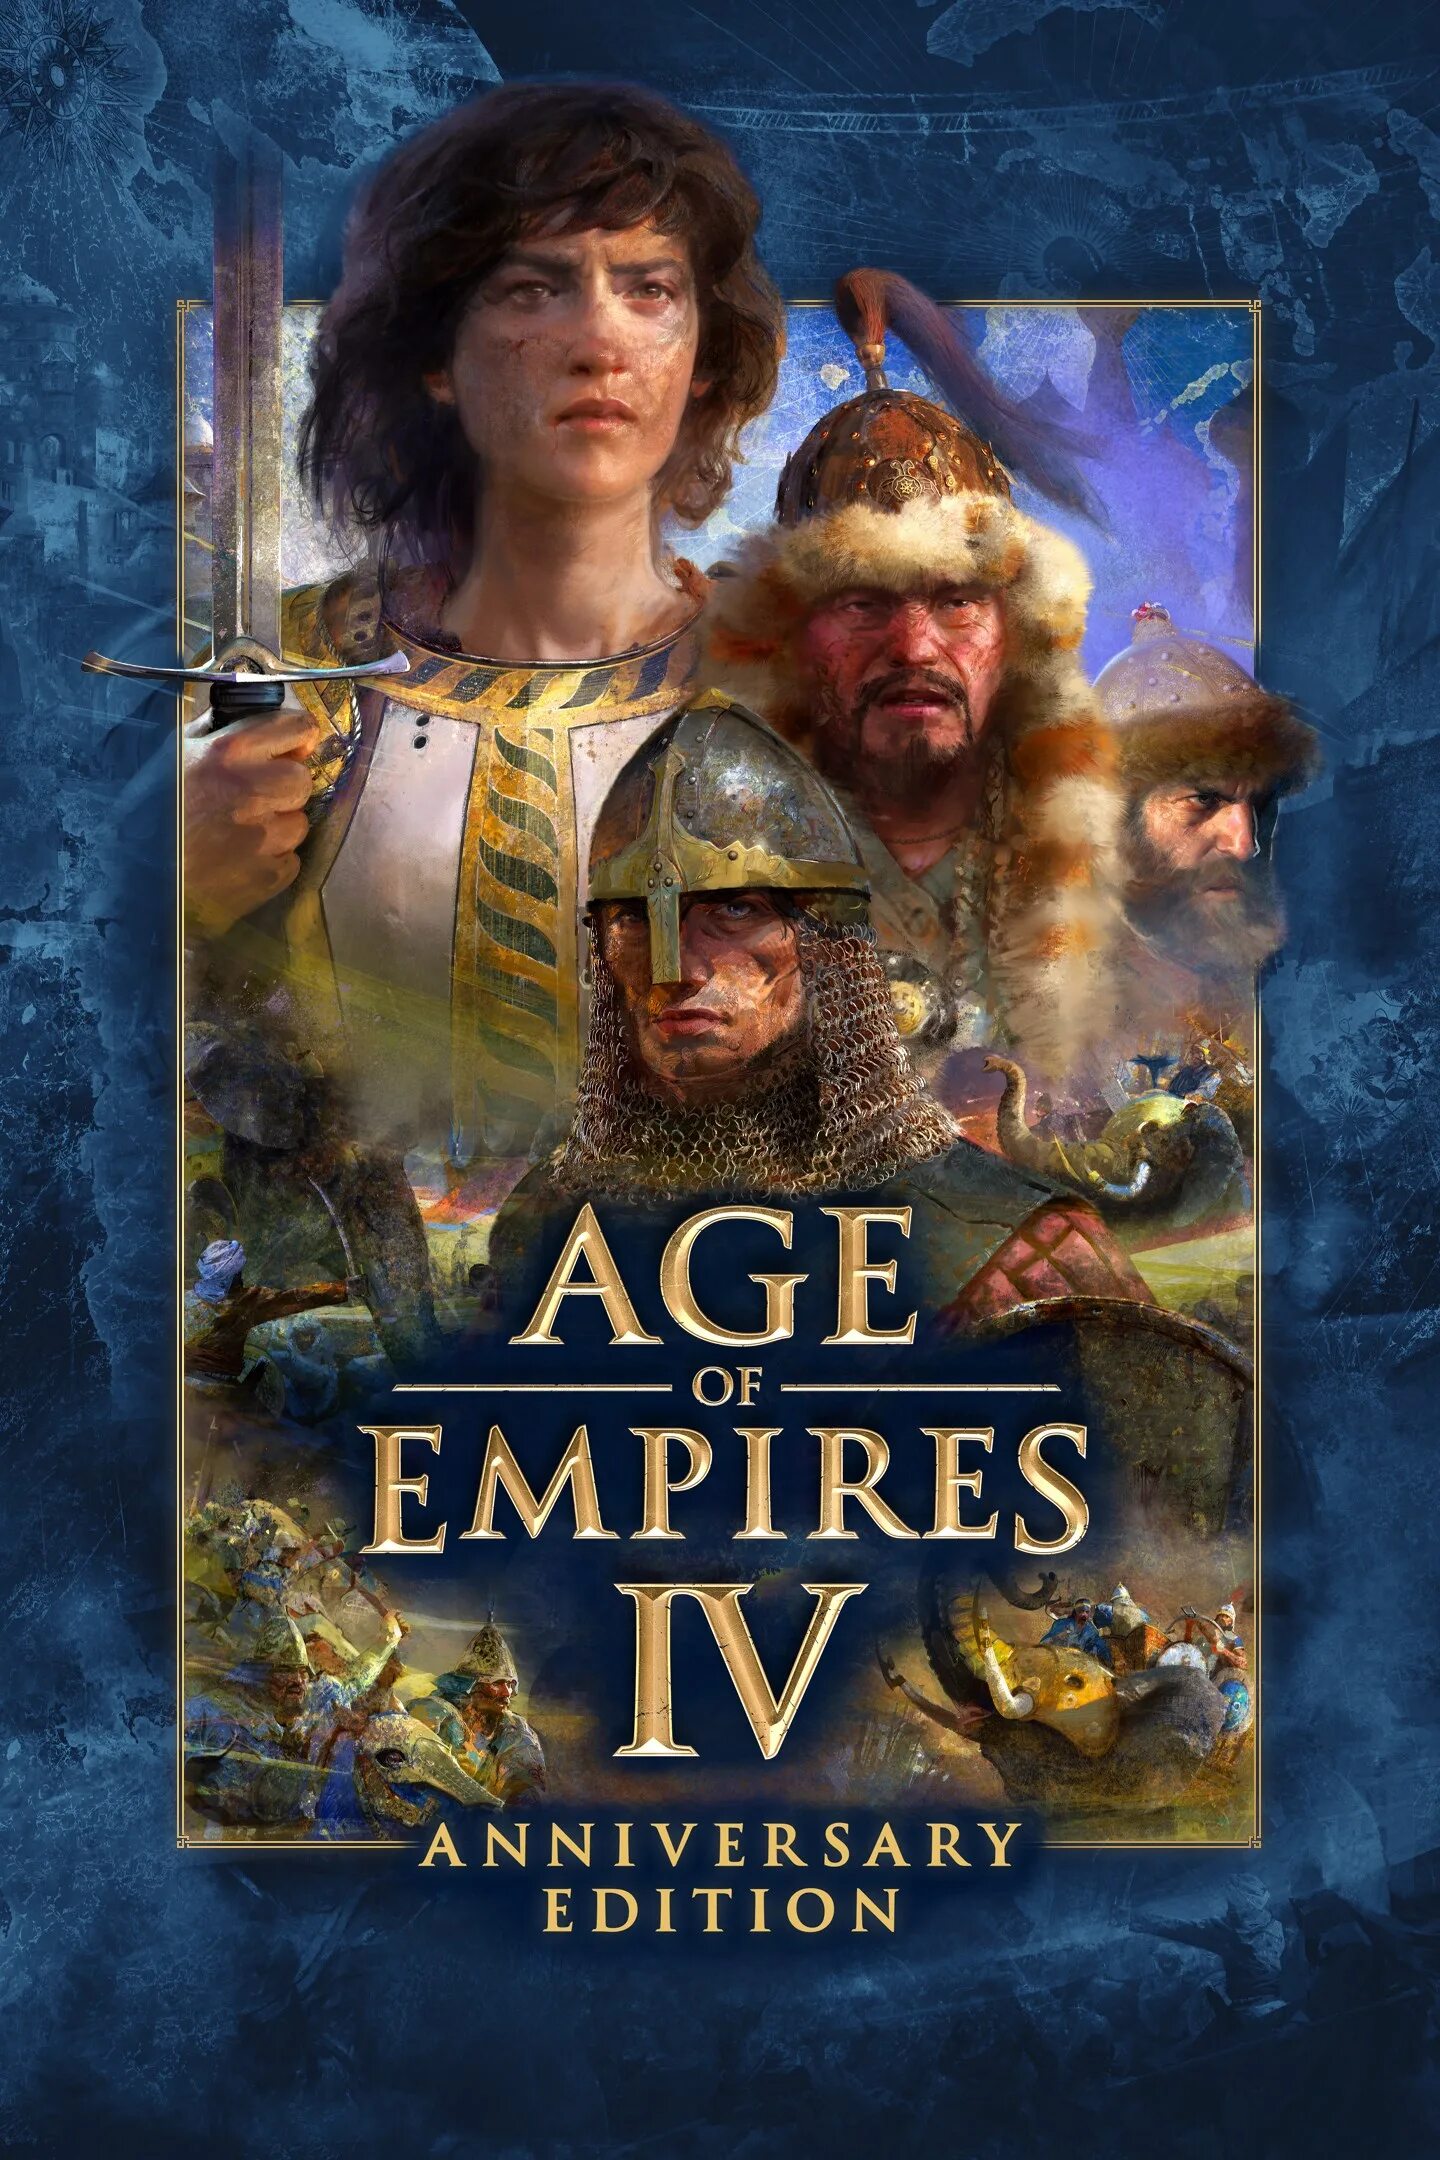 Age of Empires IV. Age of Empires 4 Anniversary Edition. Age of Empires обложка. Age of Empires IV обложка.